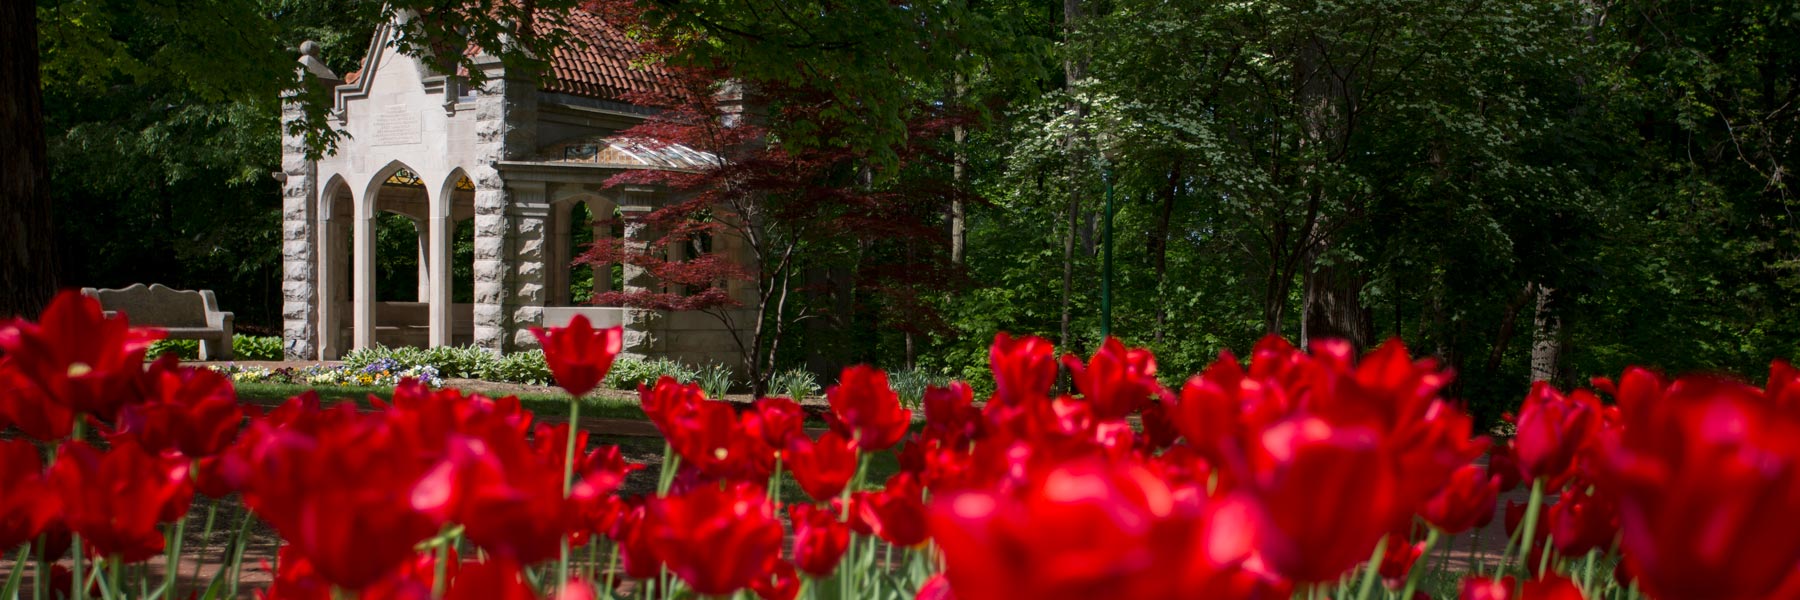 A field of red tulips in front of the Rose Well House on the IU Bloomington campus